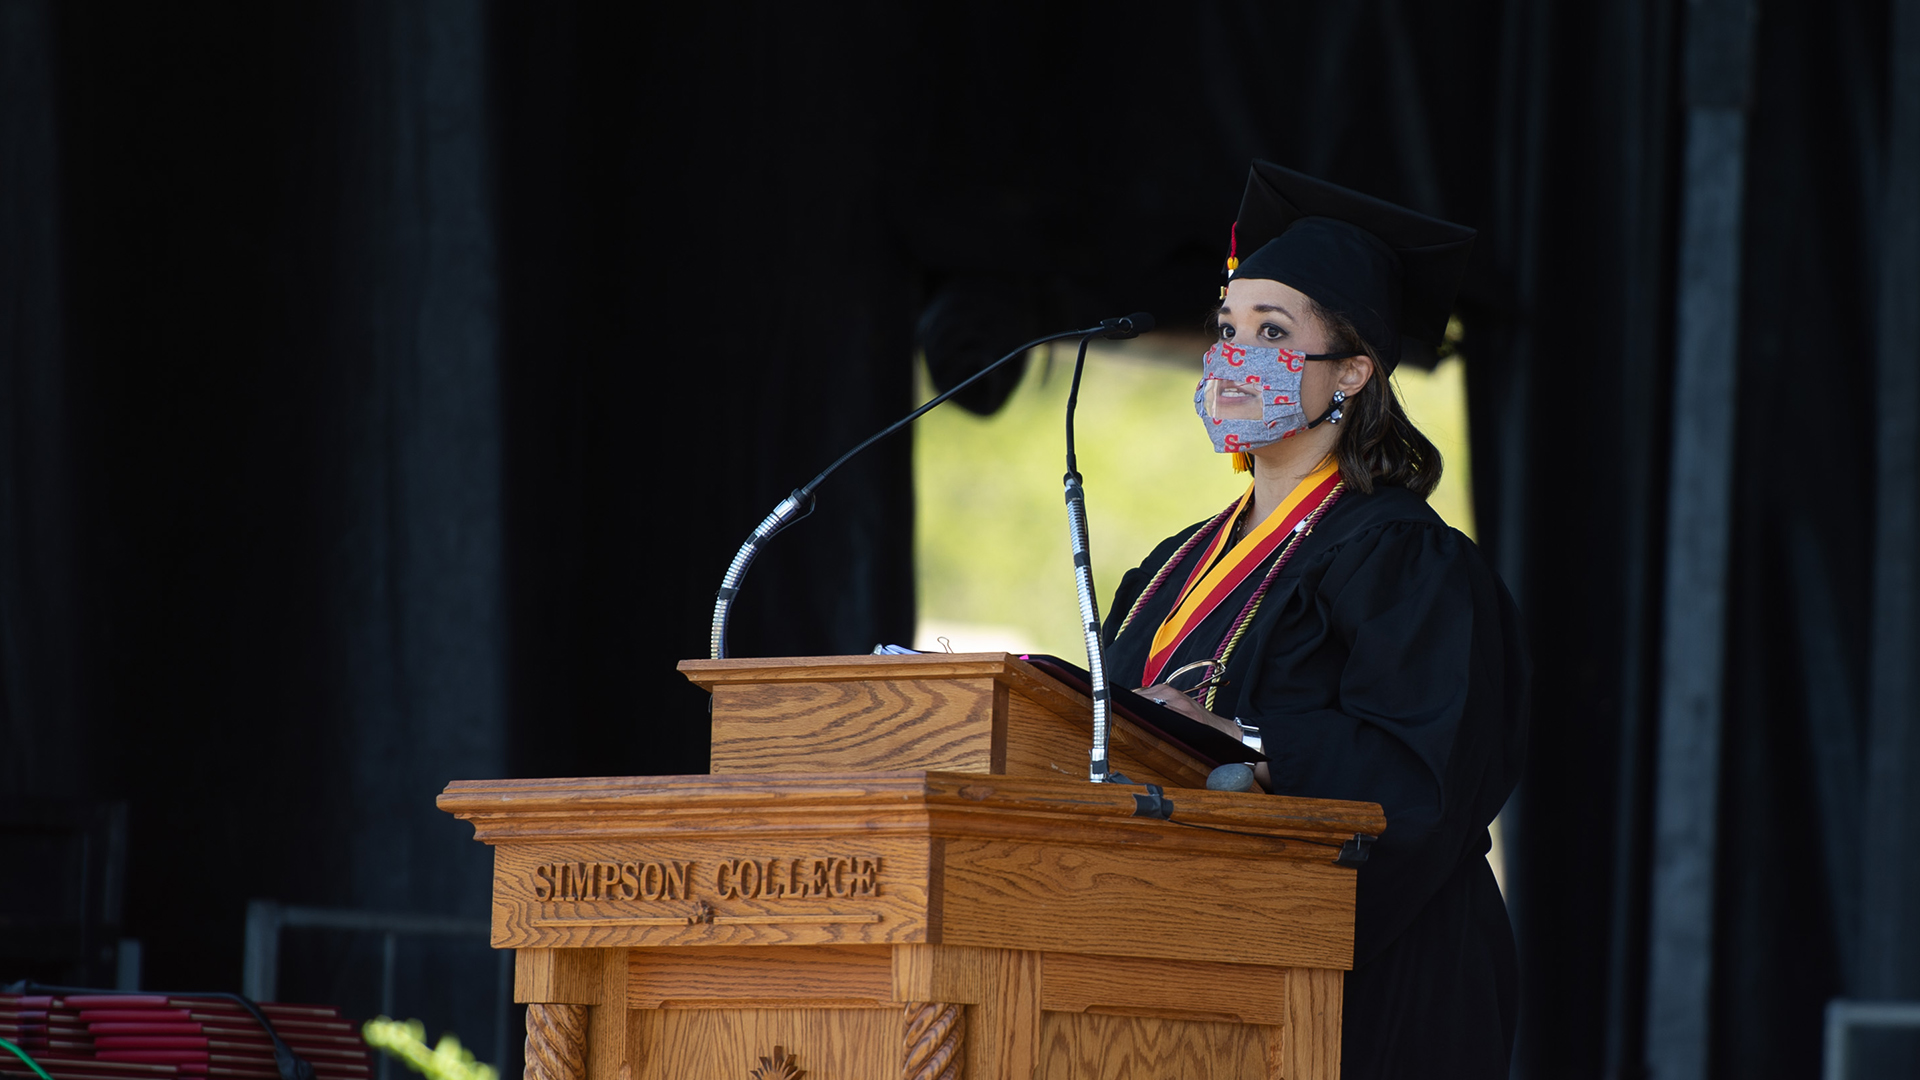 Simpson College graduate Lyra Halsten ’21 delivers the continuing and graduate address at the 2021 afternoon commencement ceremony.